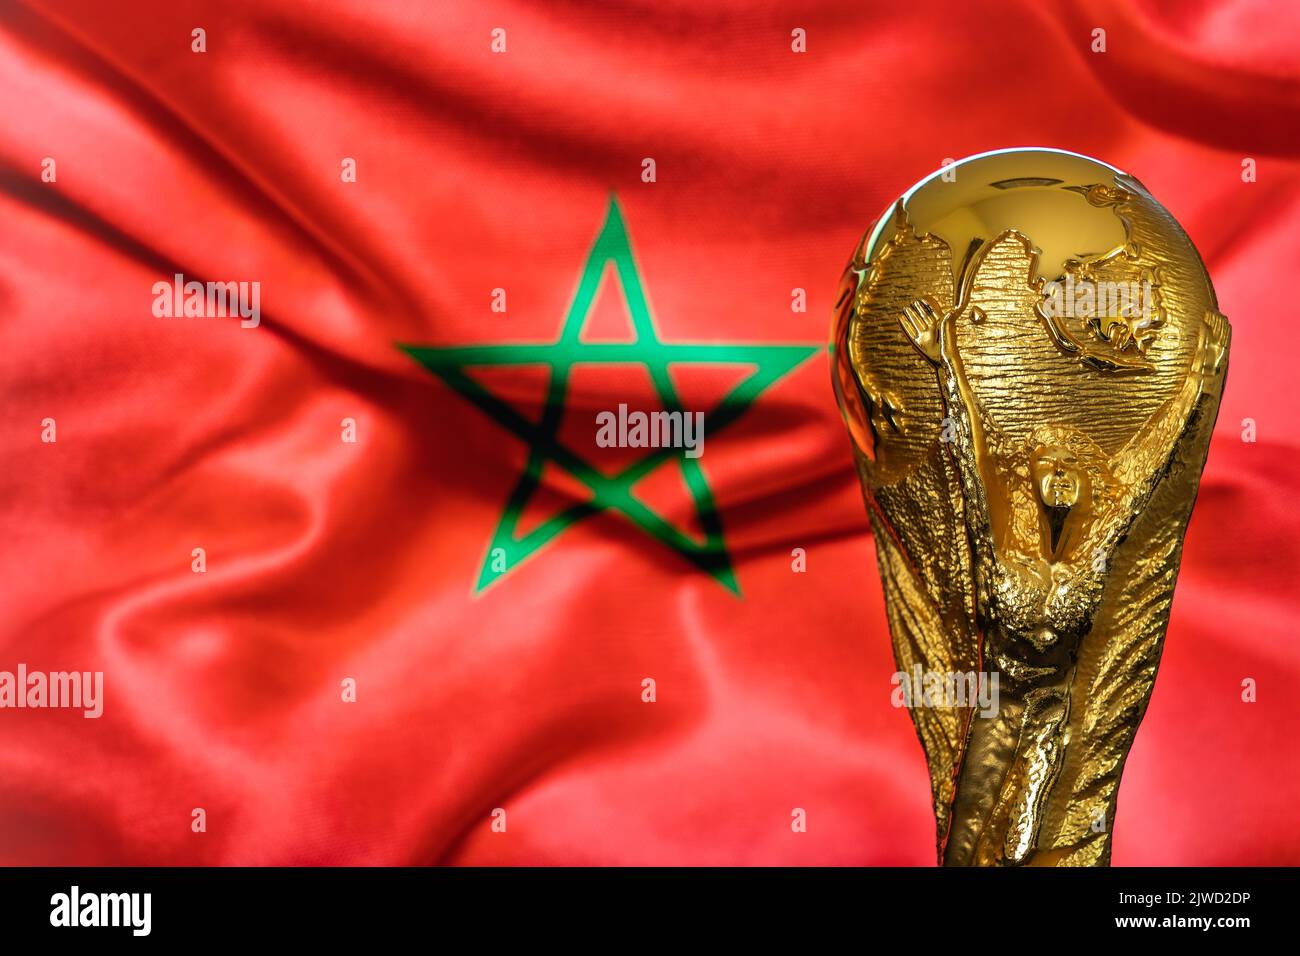 Doha, Qatar - September 4, 2022: FIFA World Cup trophy against the background of Morocco flag. Stock Photo